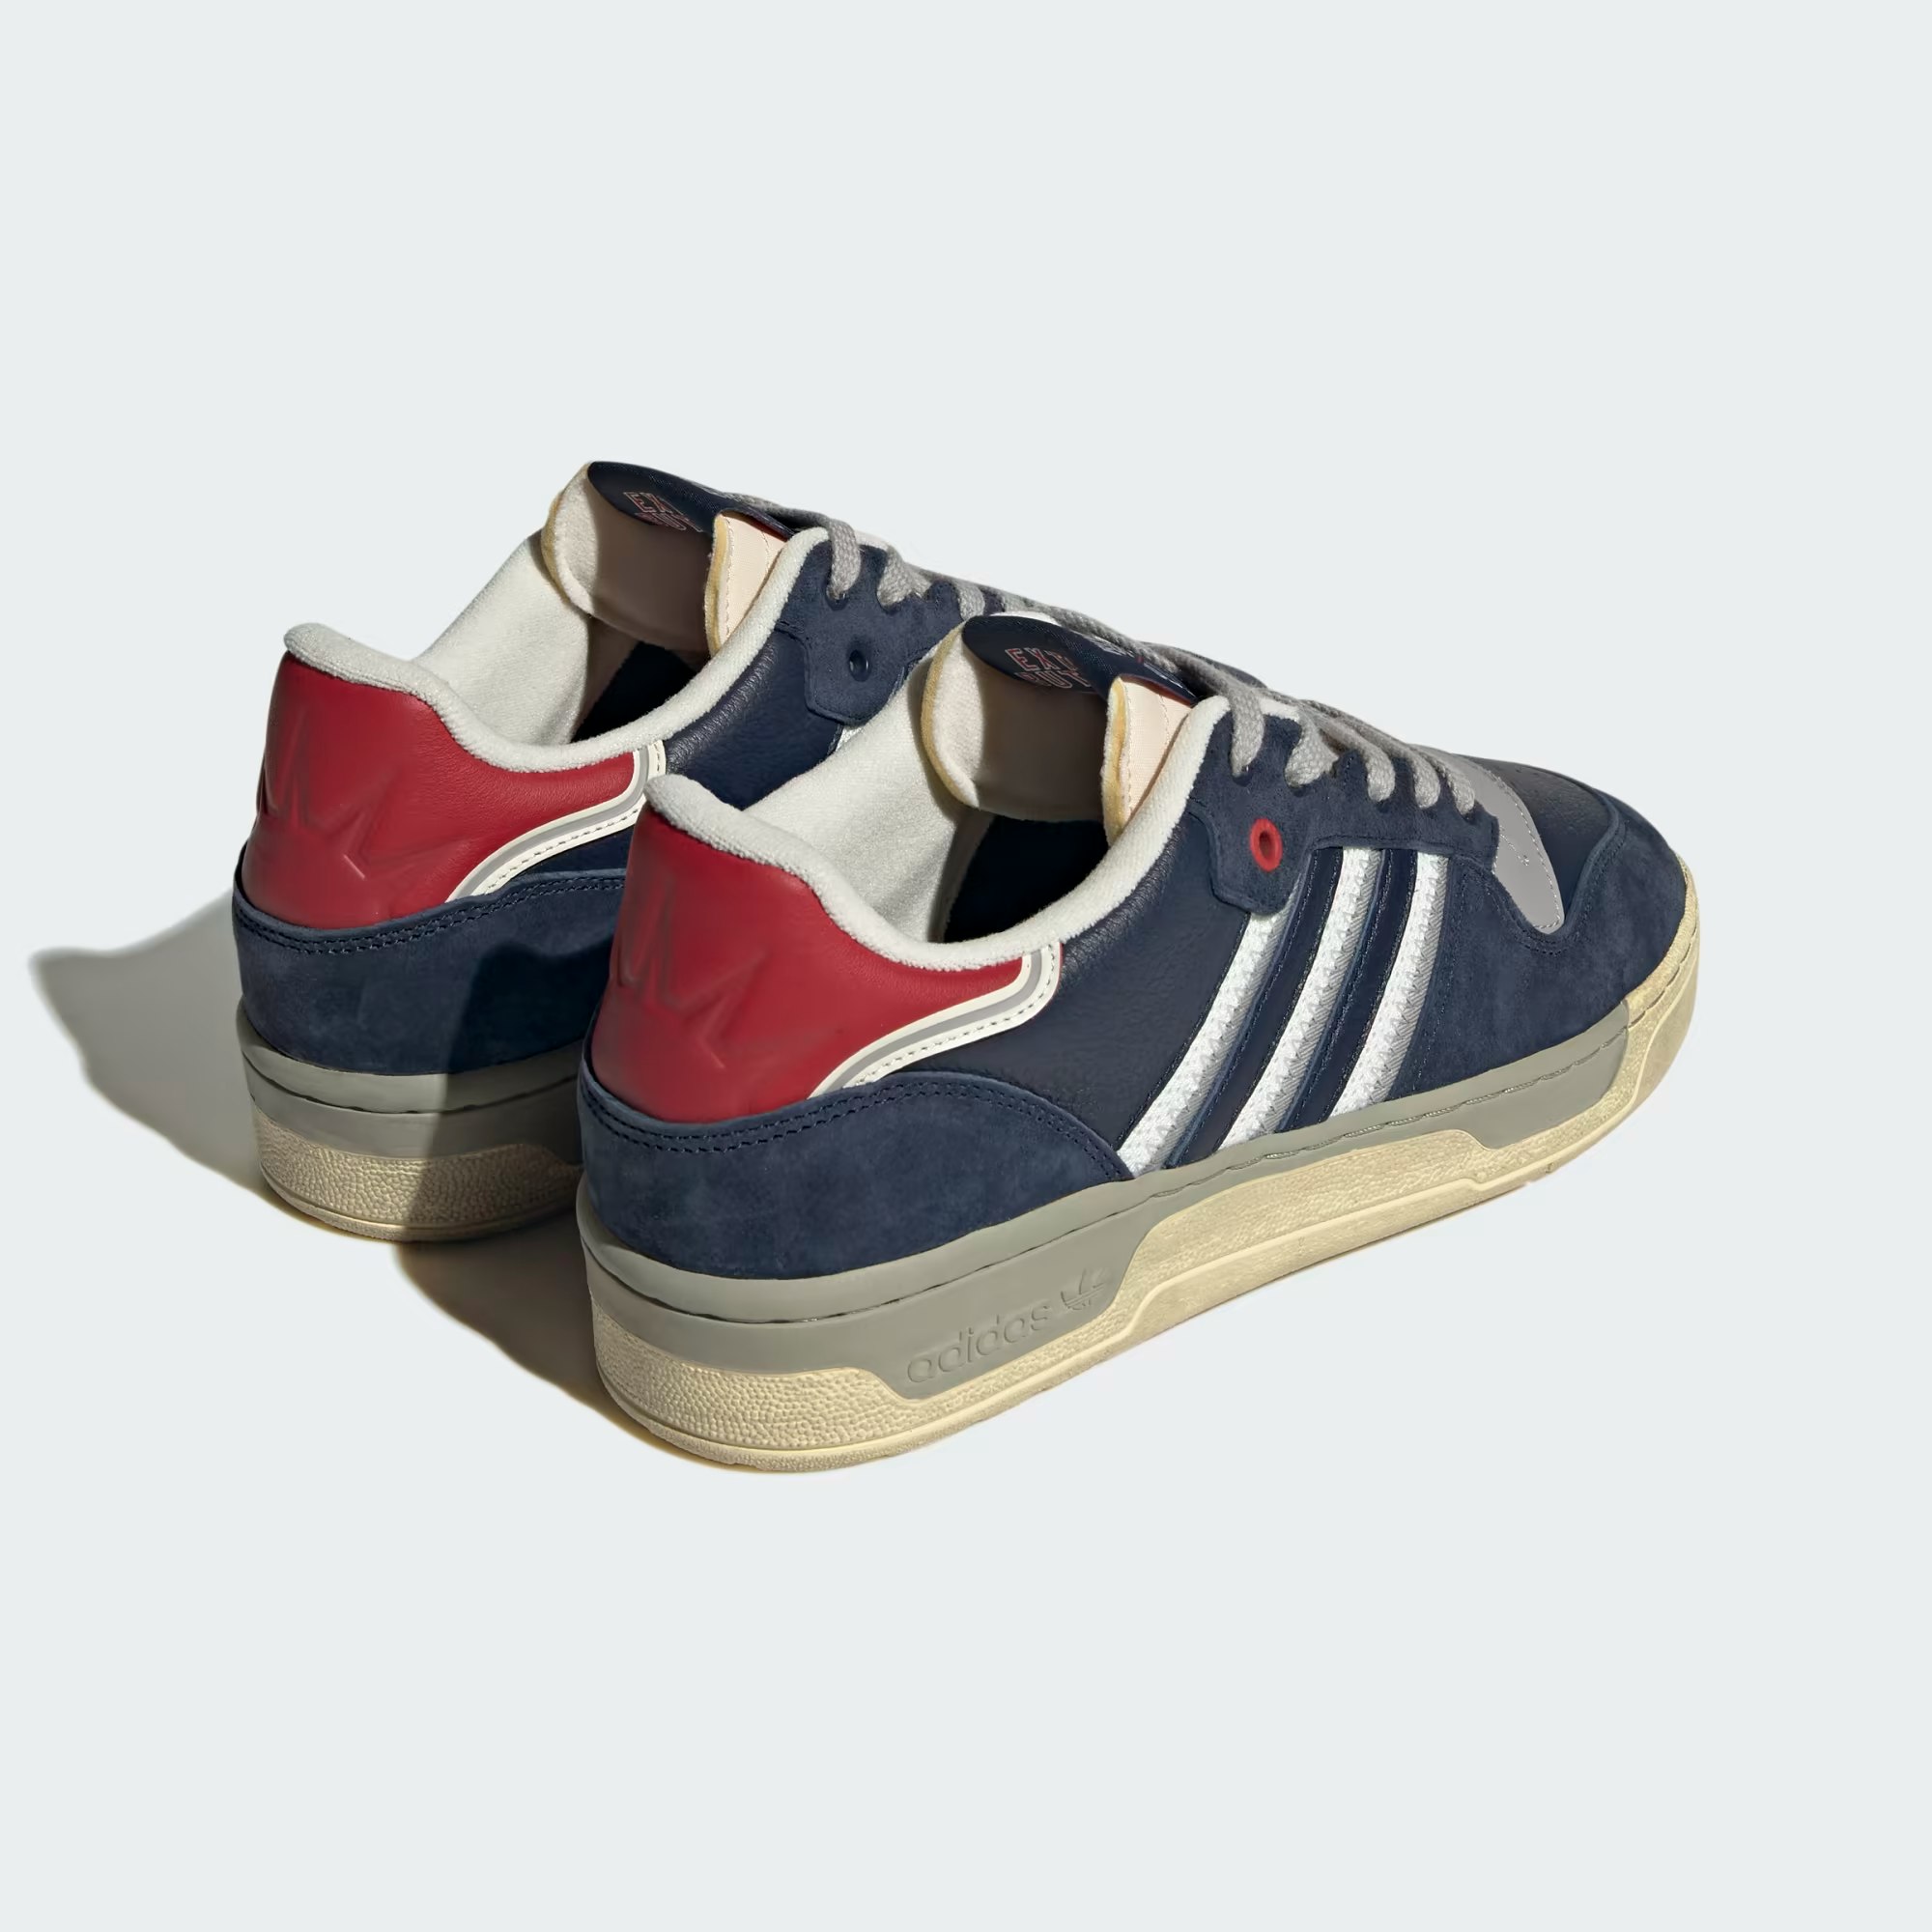 Extra Butter x adidas Rivalry Low "Collegiate Navy"